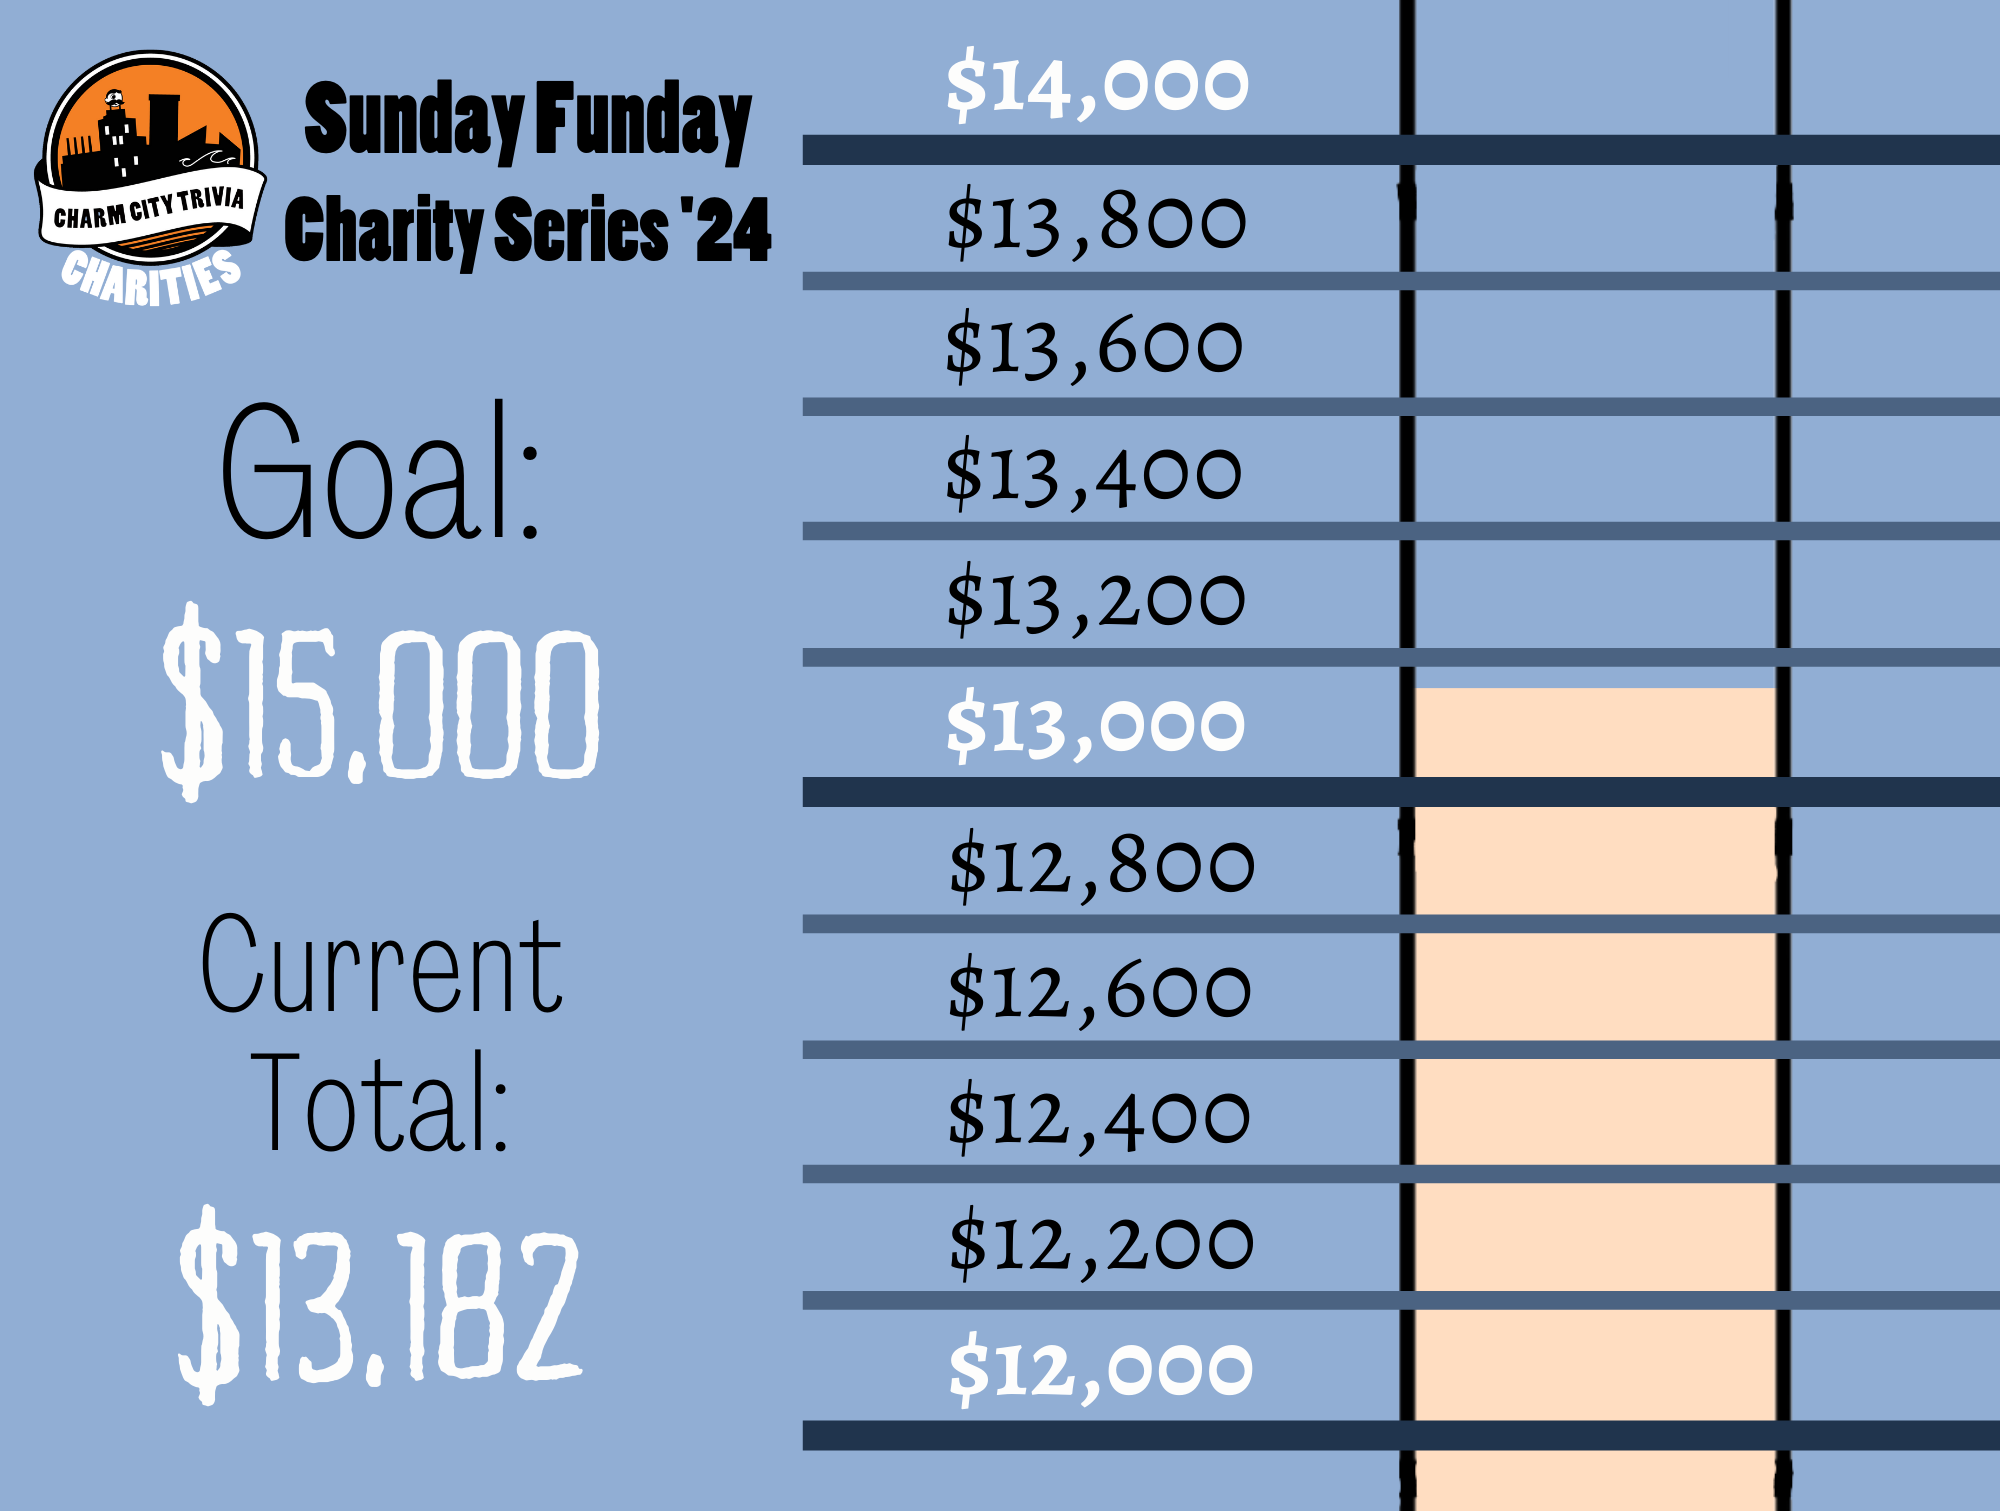 a light blue background with a section of the thermometer, blue lines separating the thermometer into donation milestones by 200s from $10,000 to $12,000, the Charm City Trivia Charities logo, a very light orange bar inside the thermometer that goes from the bottom of the image to just below the line that reads $13,200, and black and white text. The text reads: Sunday Funday Charity Series '24. Goal: $15,000. Current Total: $13,182